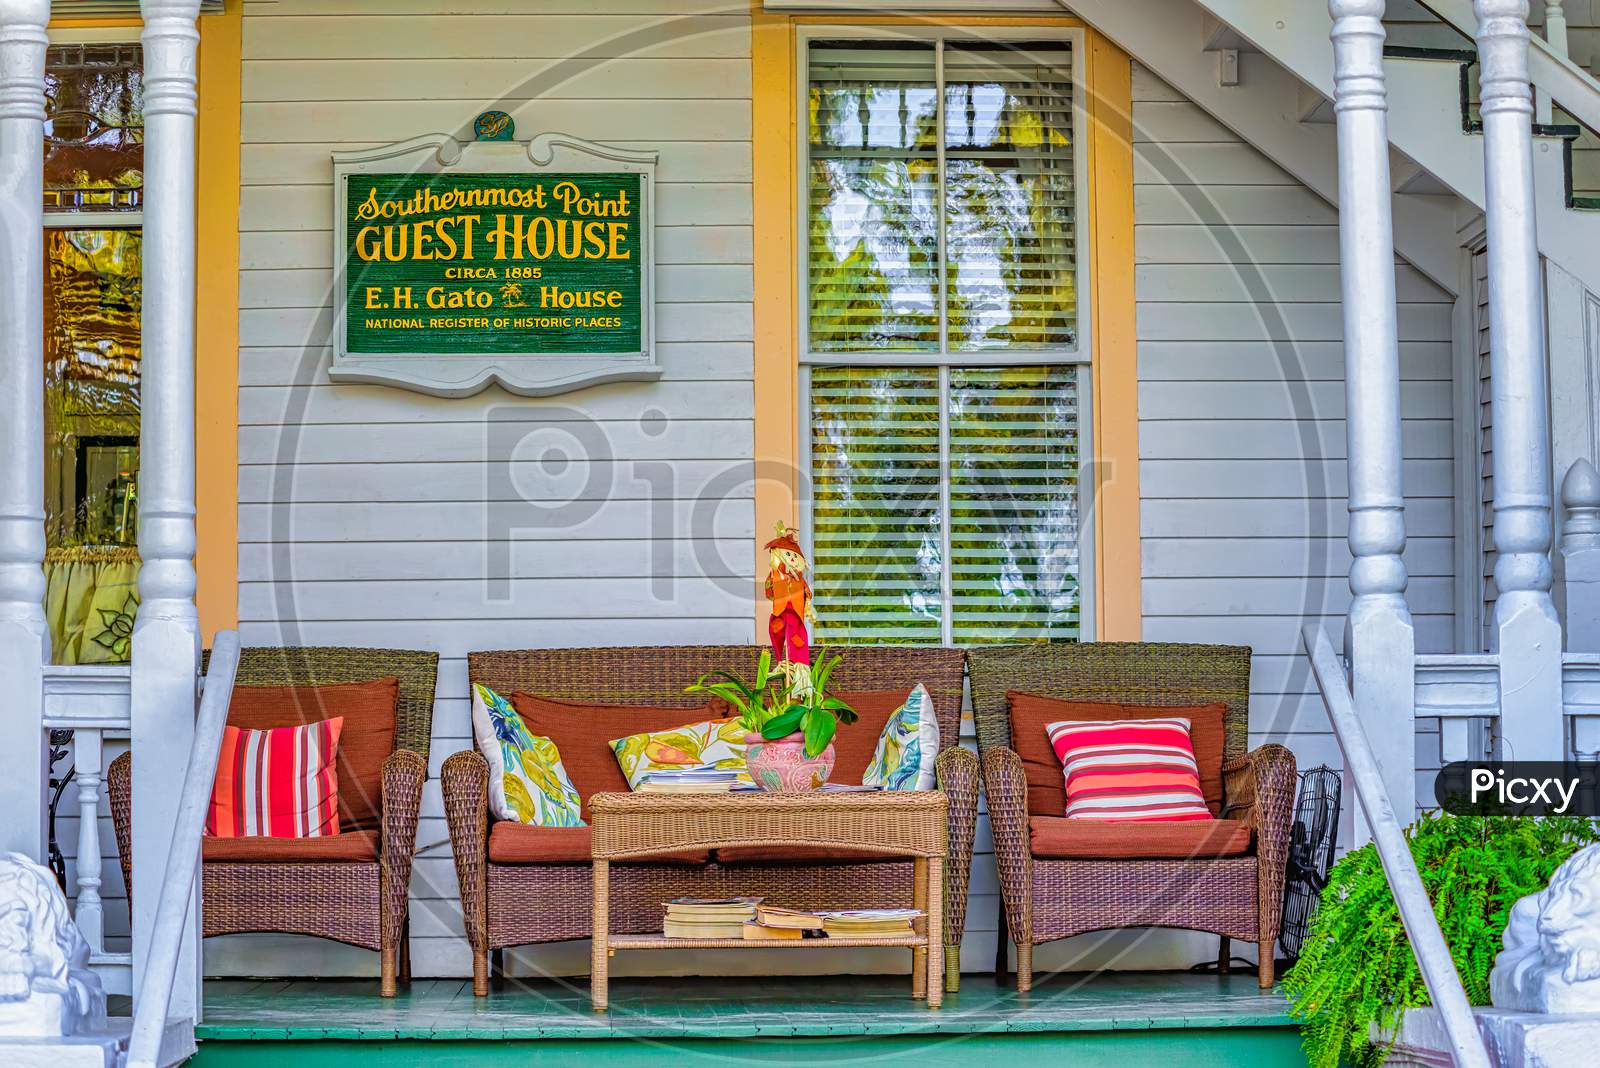 The Porch Of The Southernmost Point Guest House. Editorial use only